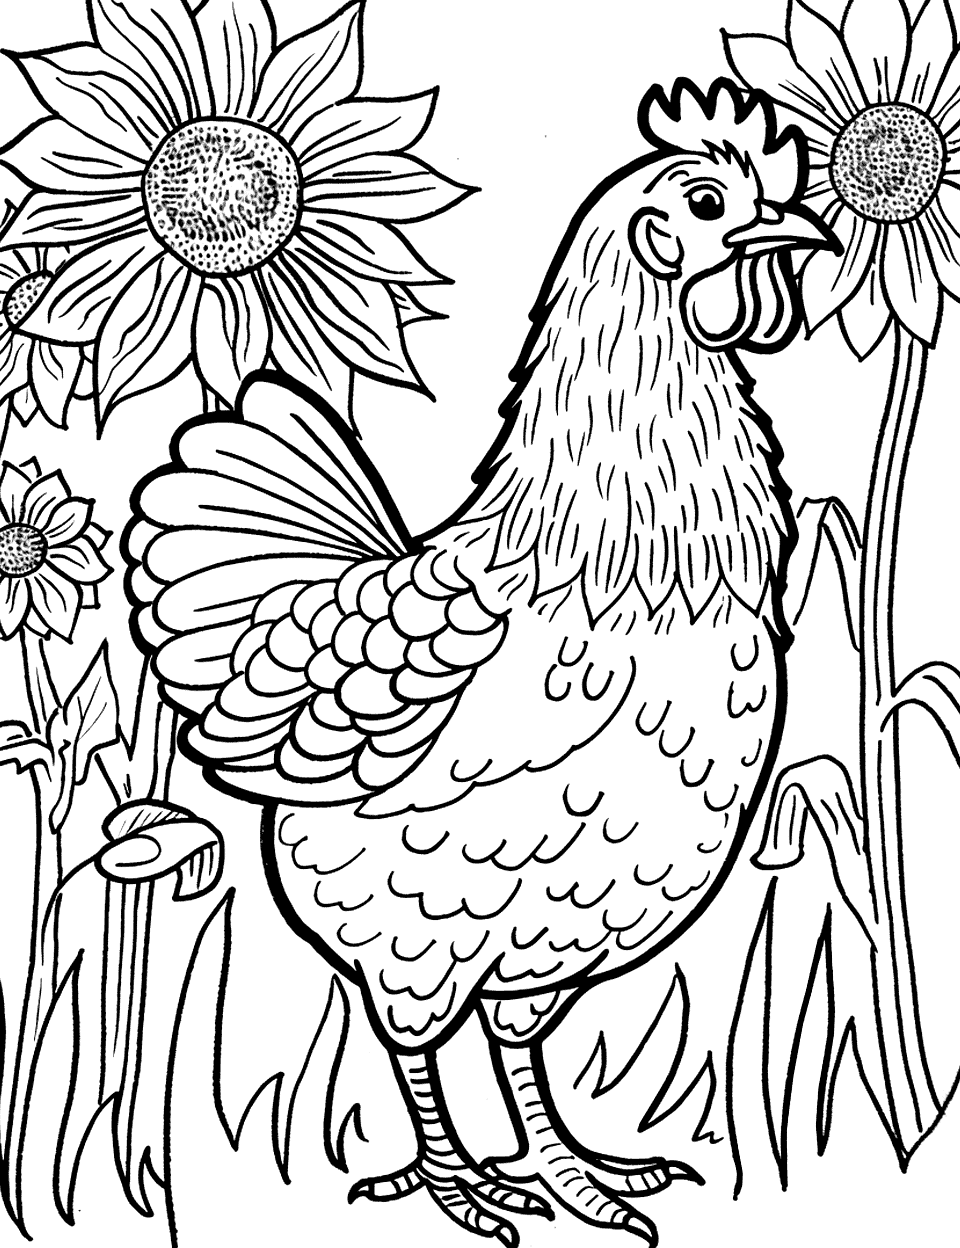 Chicken in a Field of Sunflowers Coloring Page - A chicken wandering through a simple field filled with tall sunflowers.